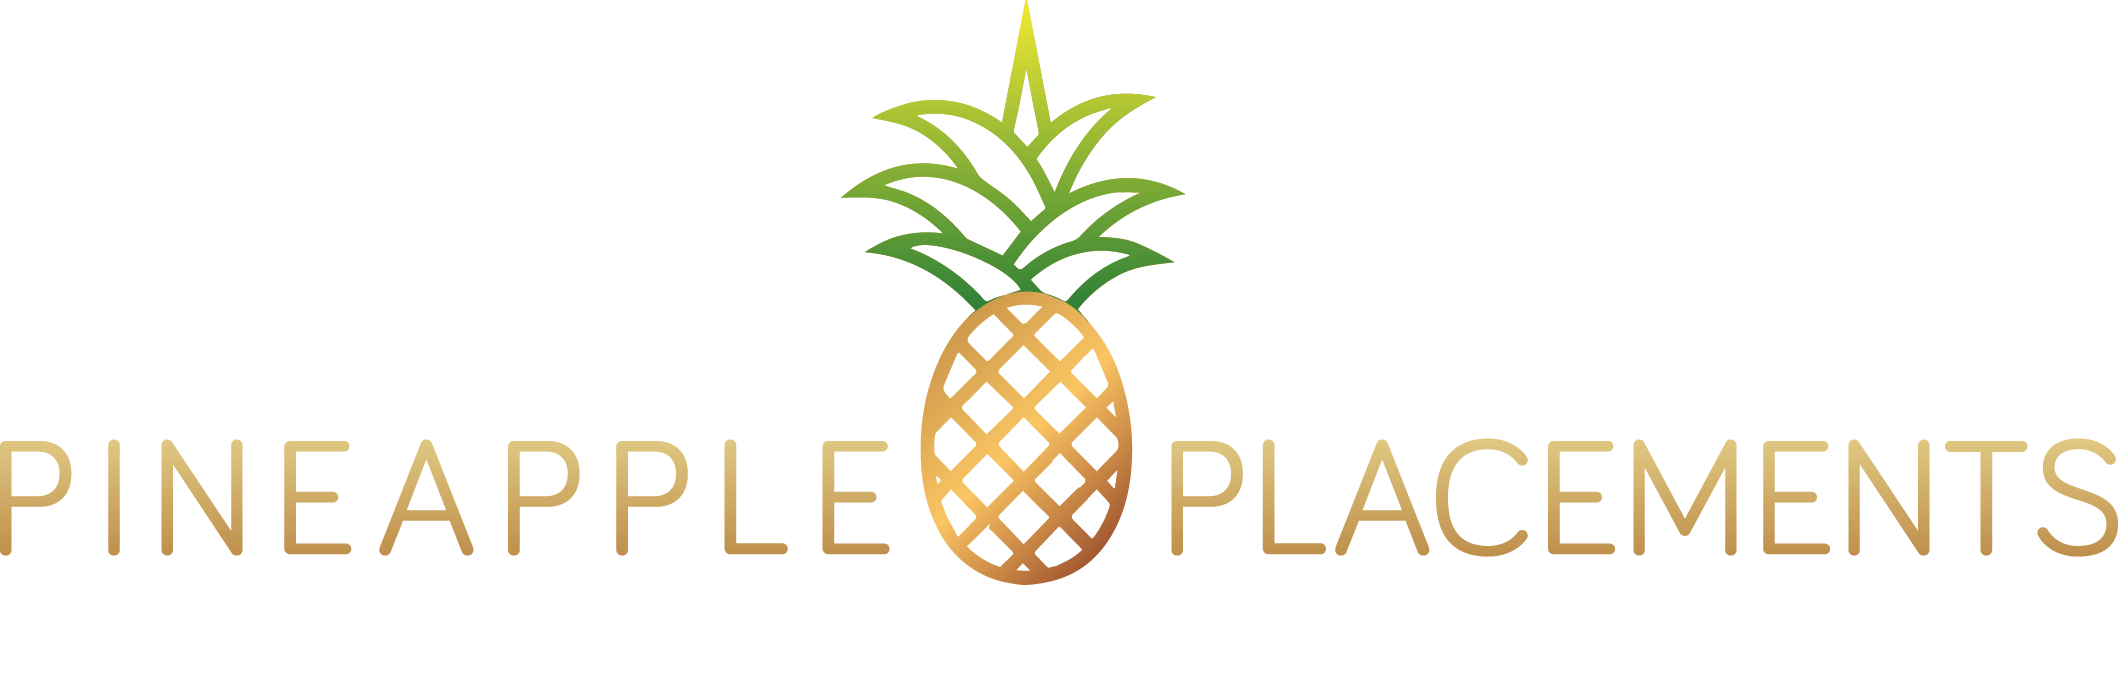 Pineapple Placements